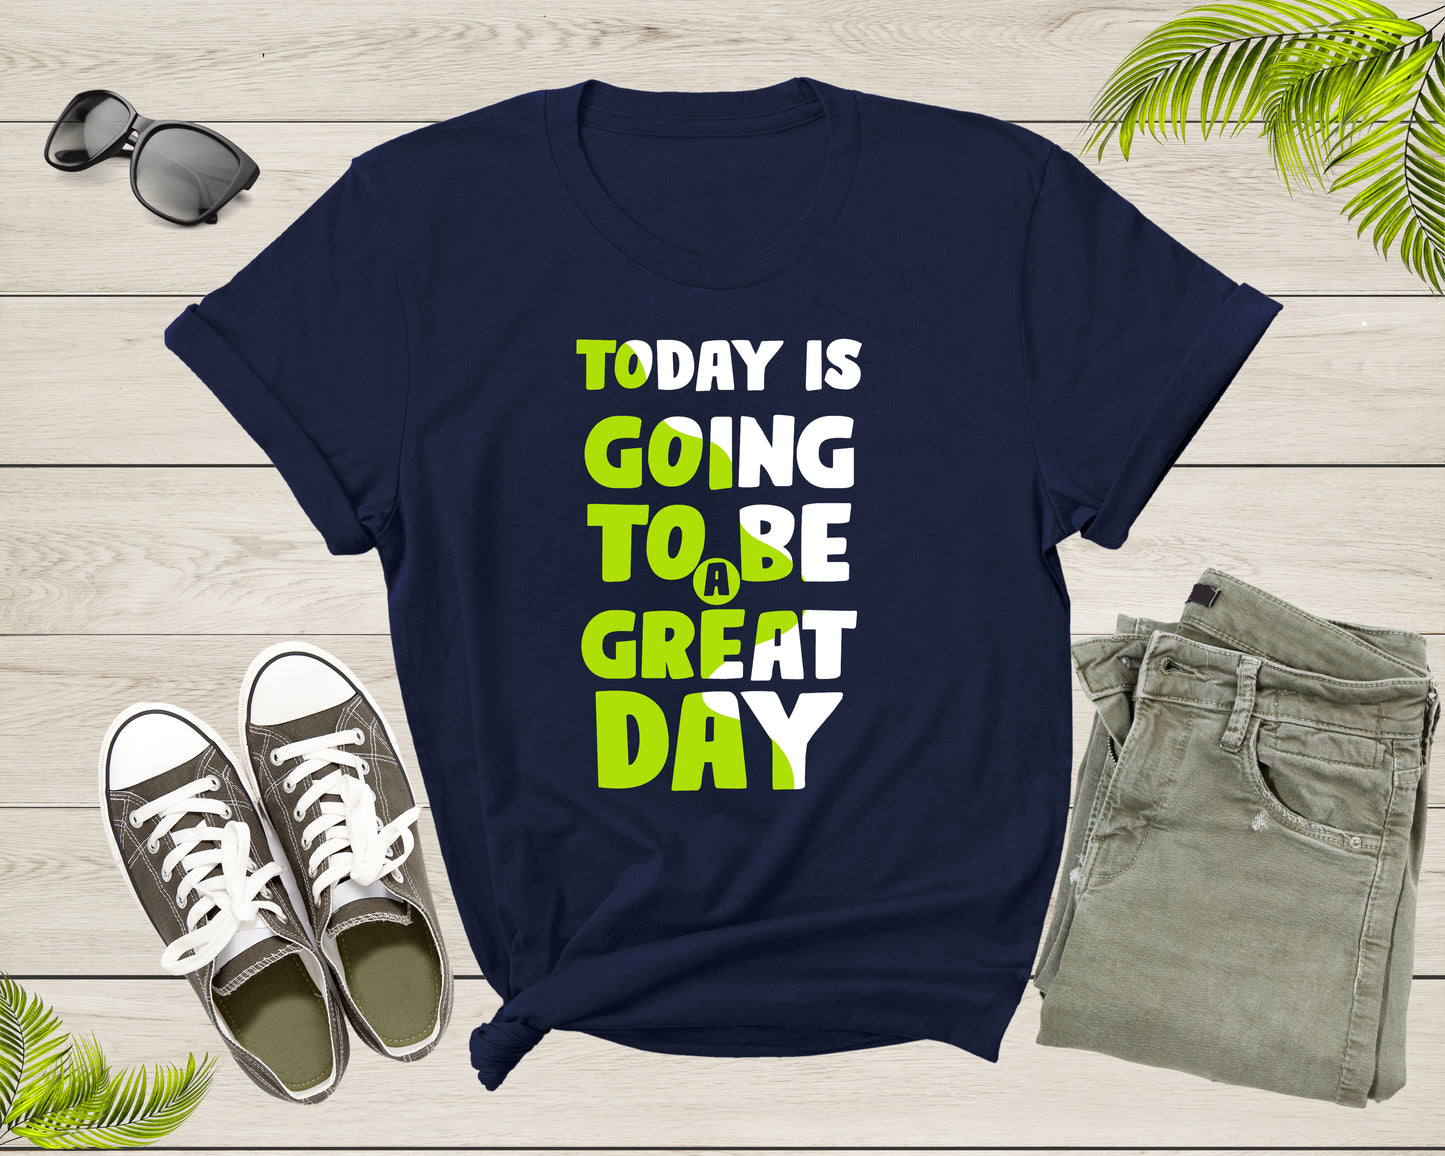 Today Is Going To Be A Great Day Motivational Slogan Text T-Shirt Cool Quote Lover Gift T Shirt for Men Women Kids Boys Girls Teens Tshirt